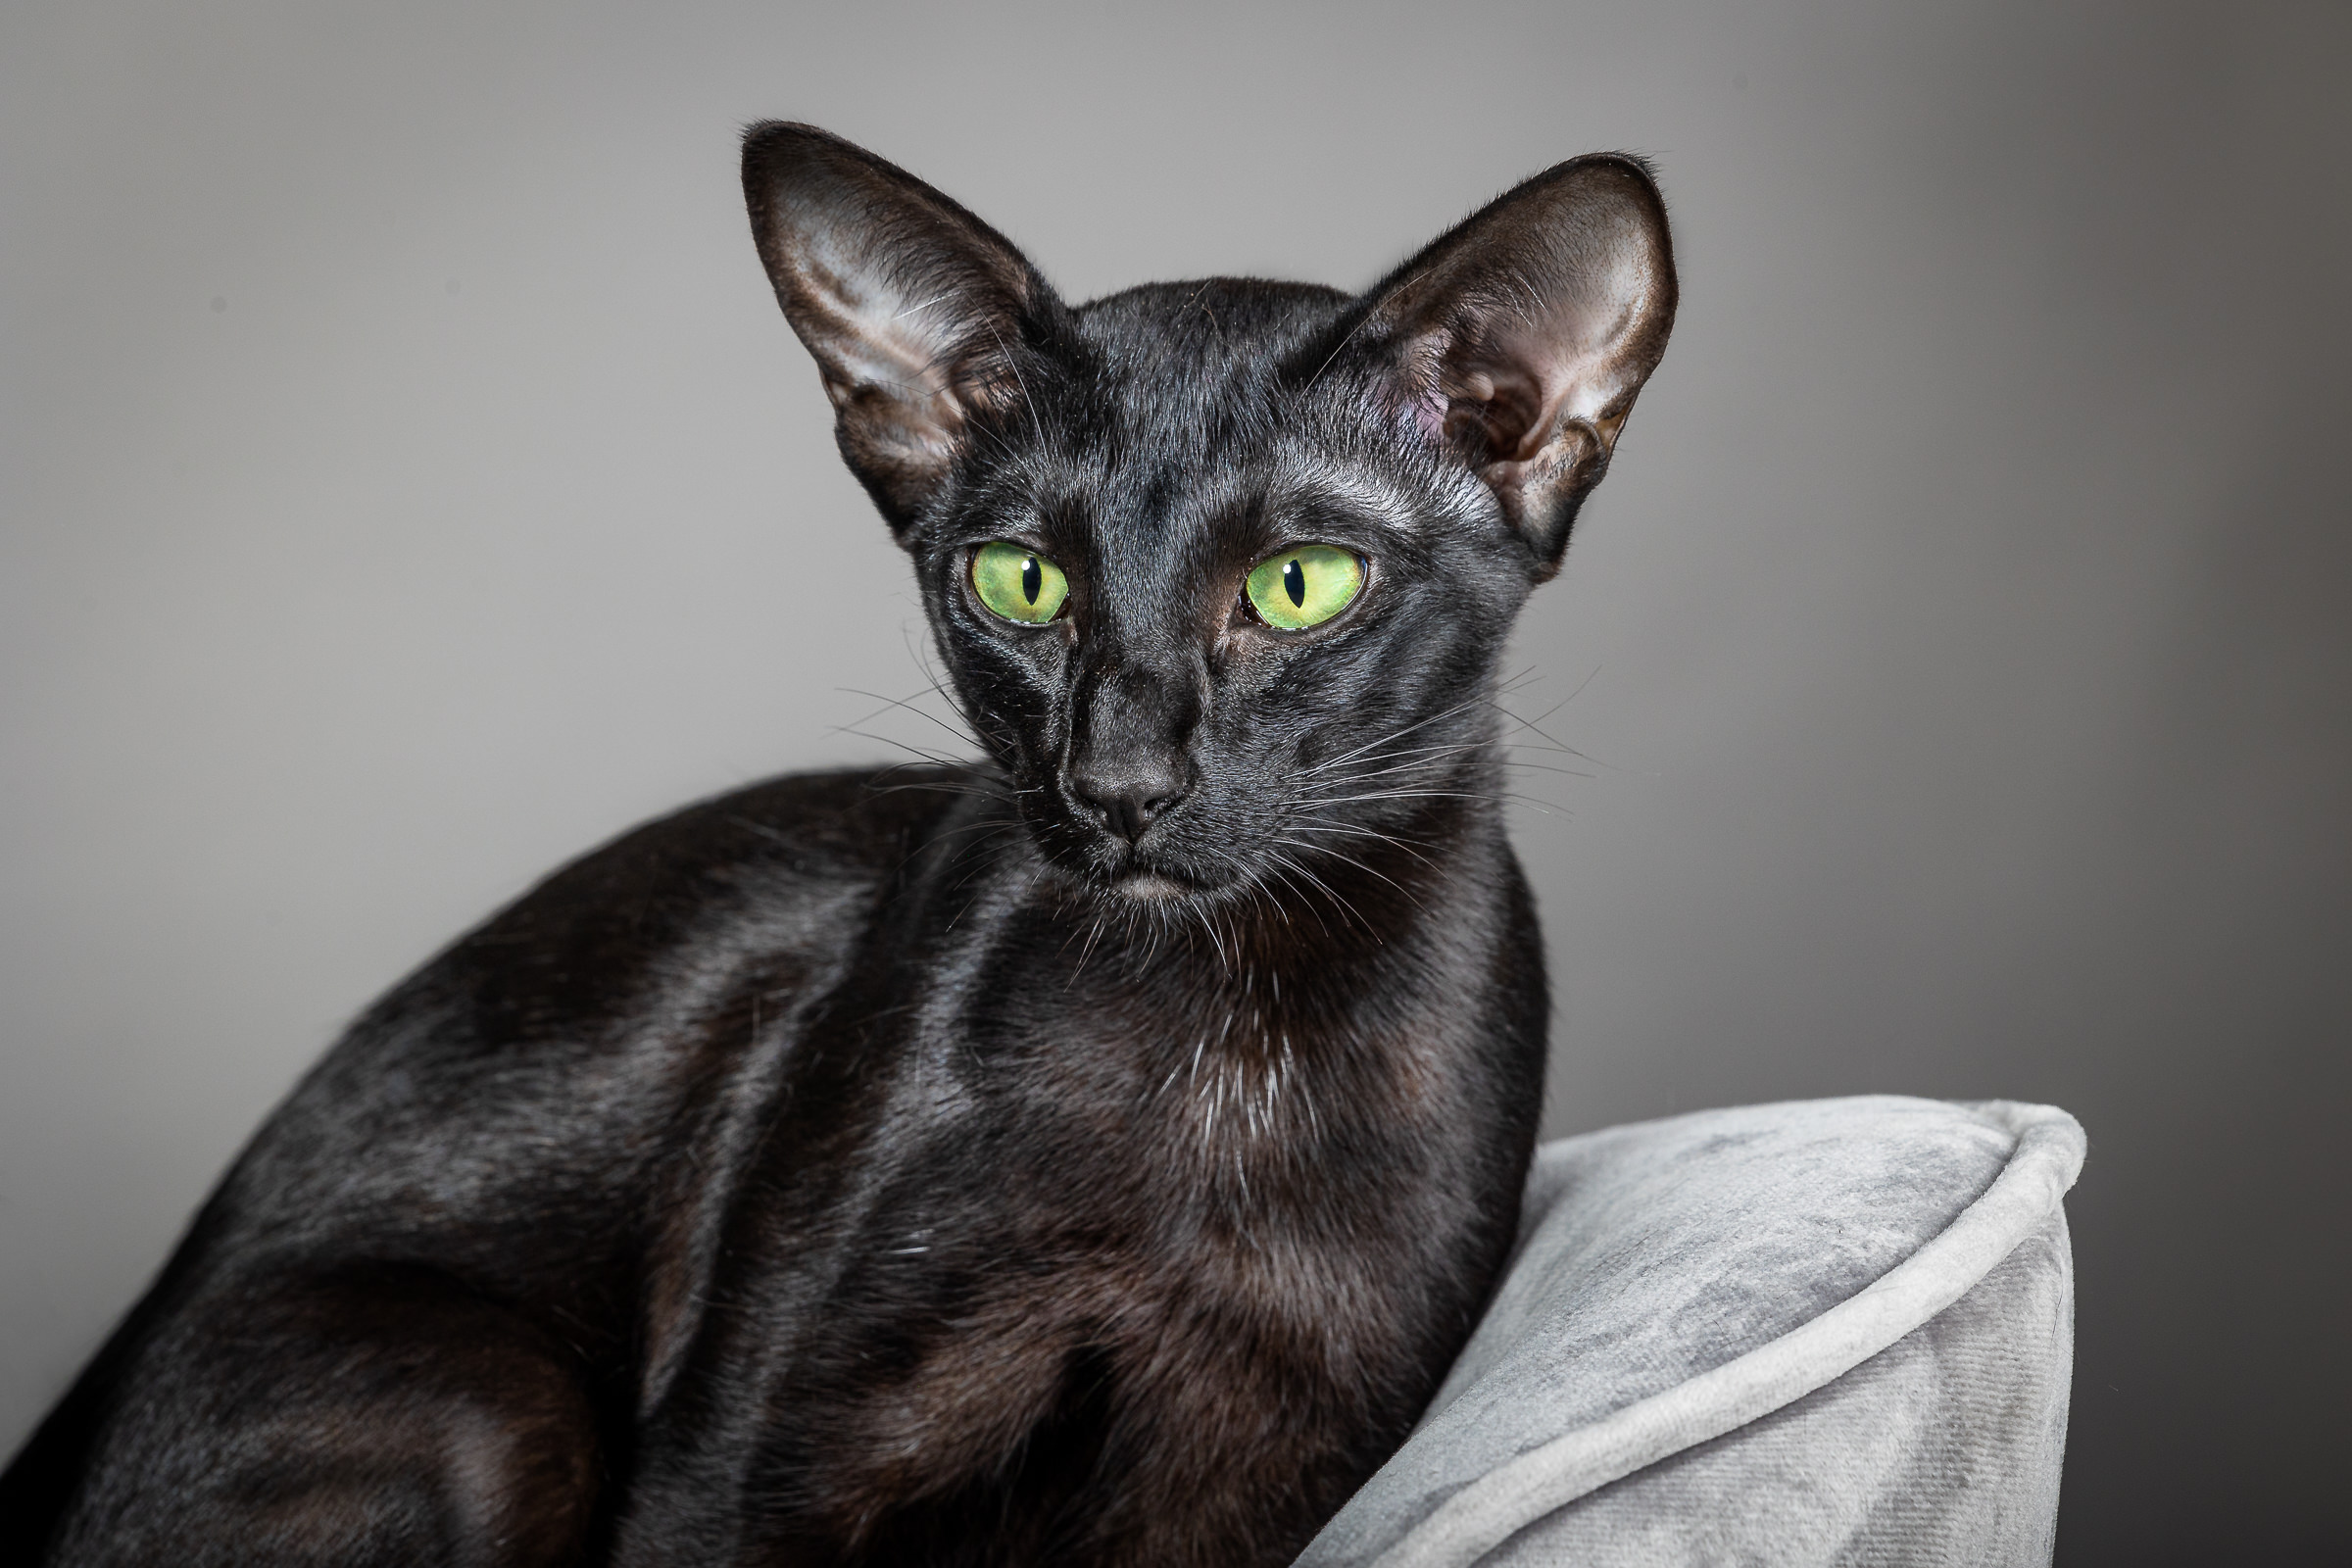 Black cat portrait with green eyes on grey background